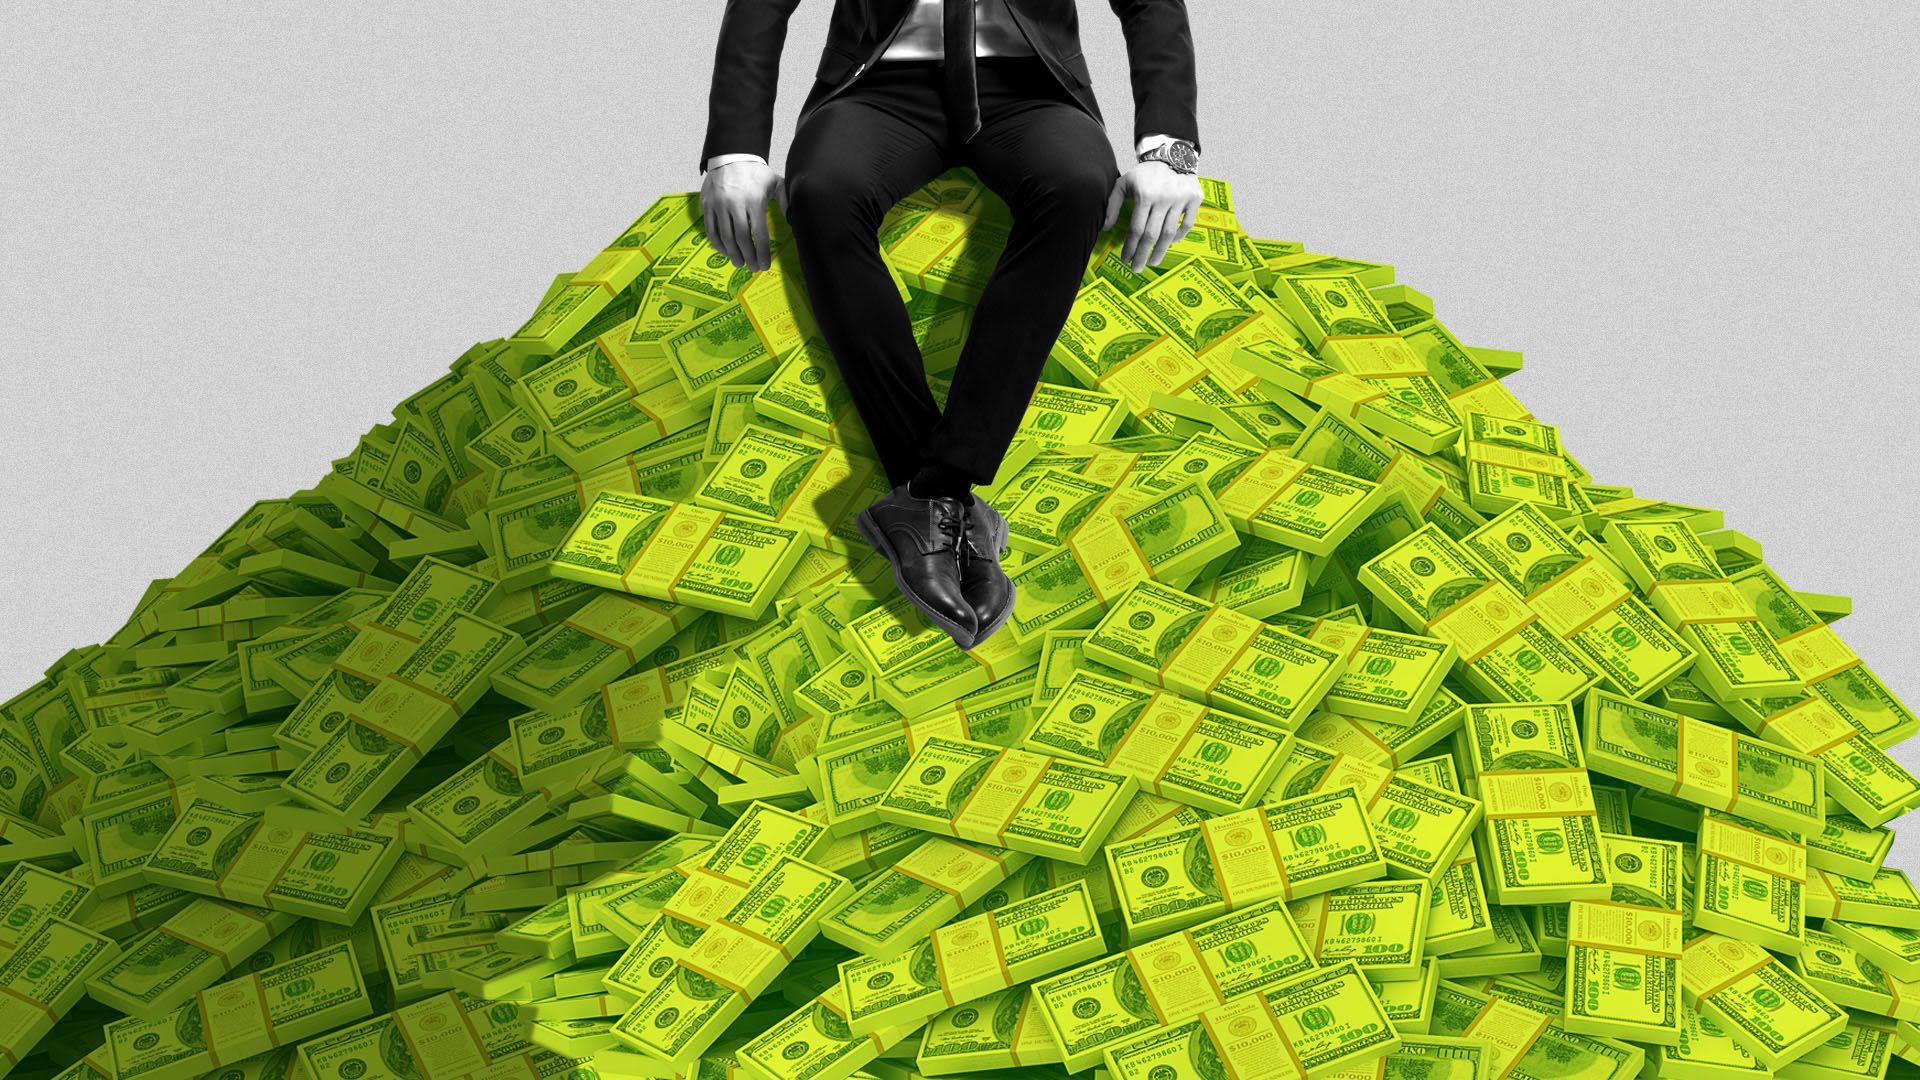 an illustration of someone sitting on top of a stack of cash